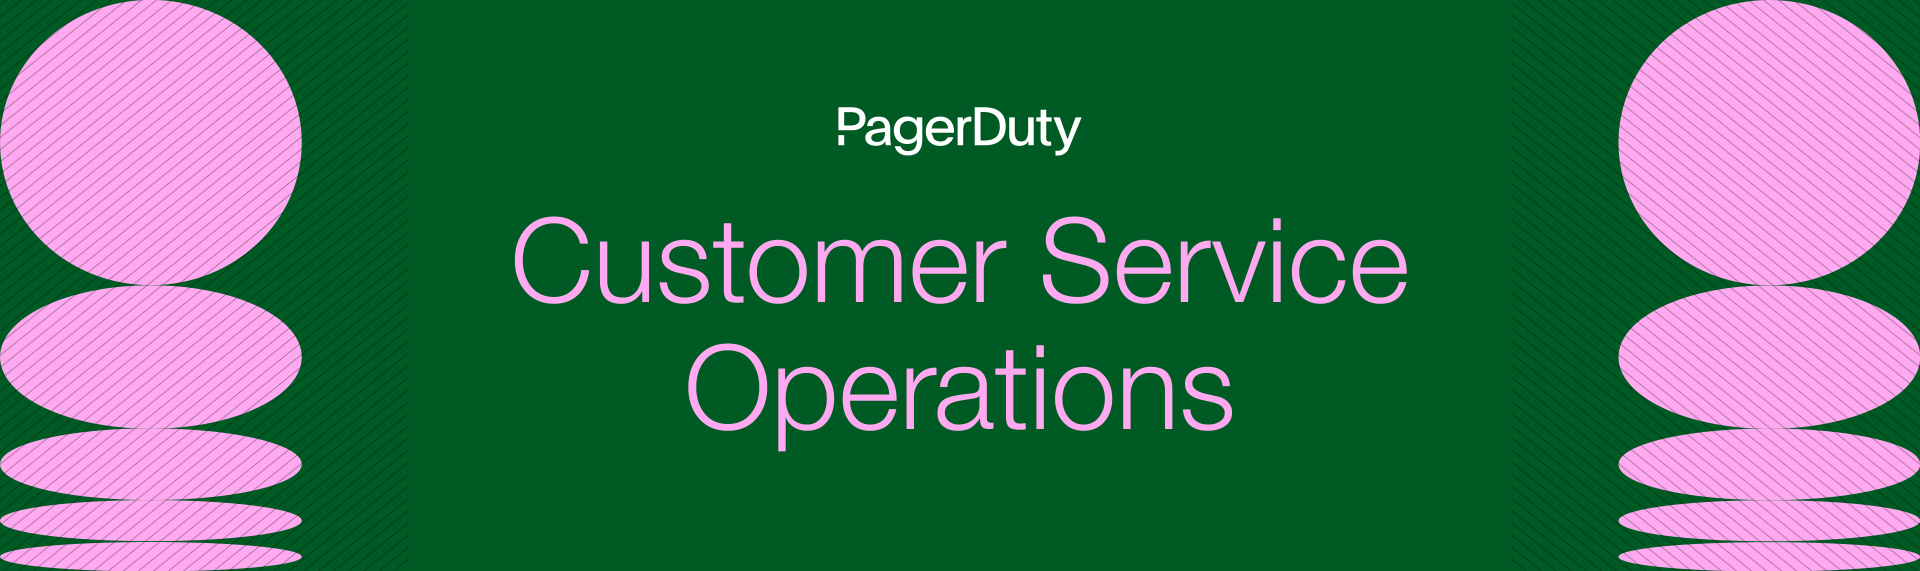 Document Title: Customer Service Operations